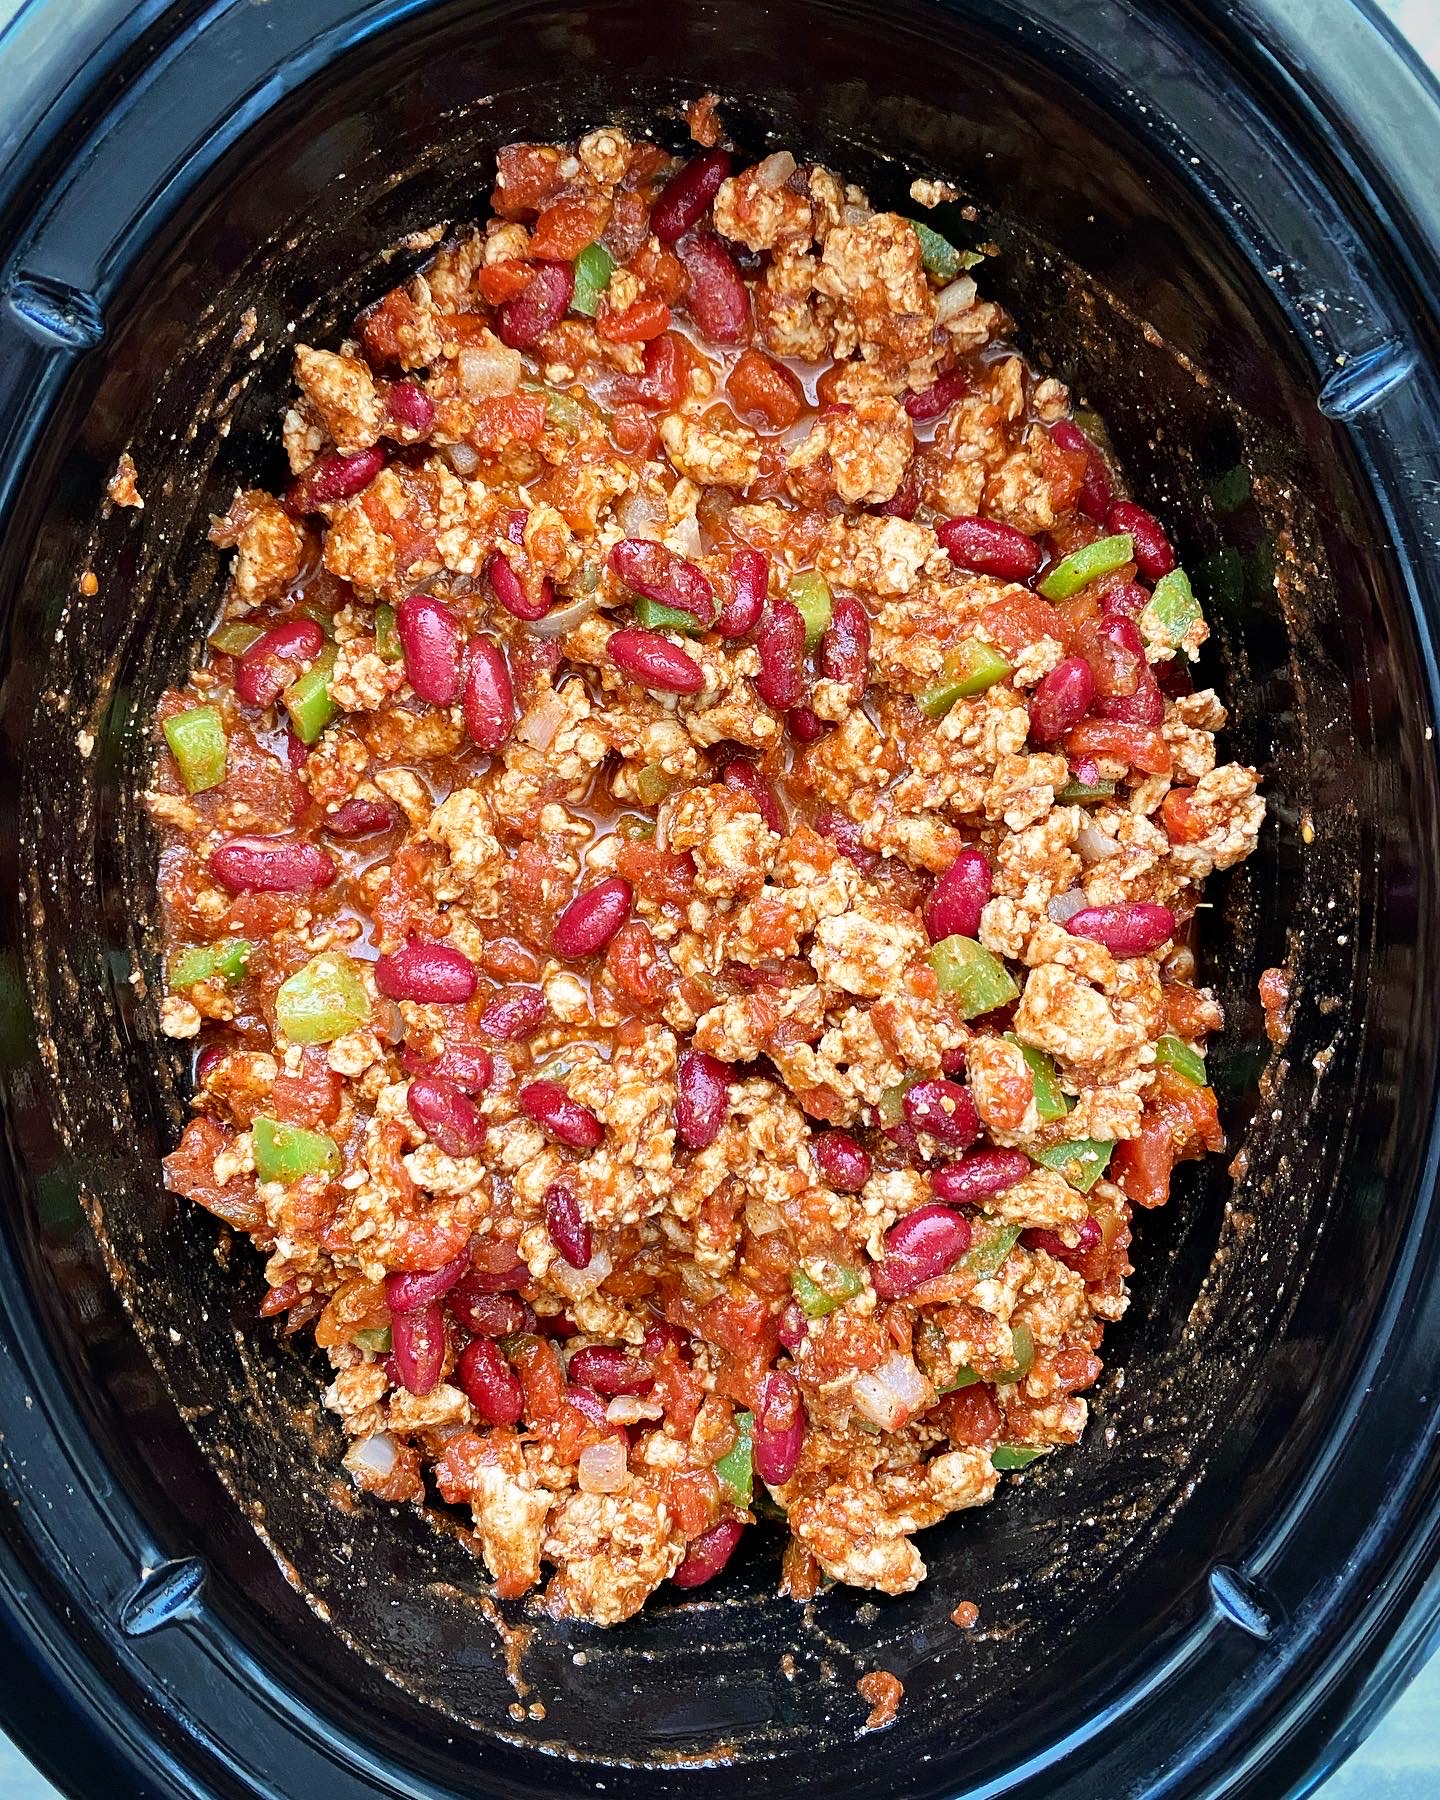 uncooked turkey chili in a black slow cooker